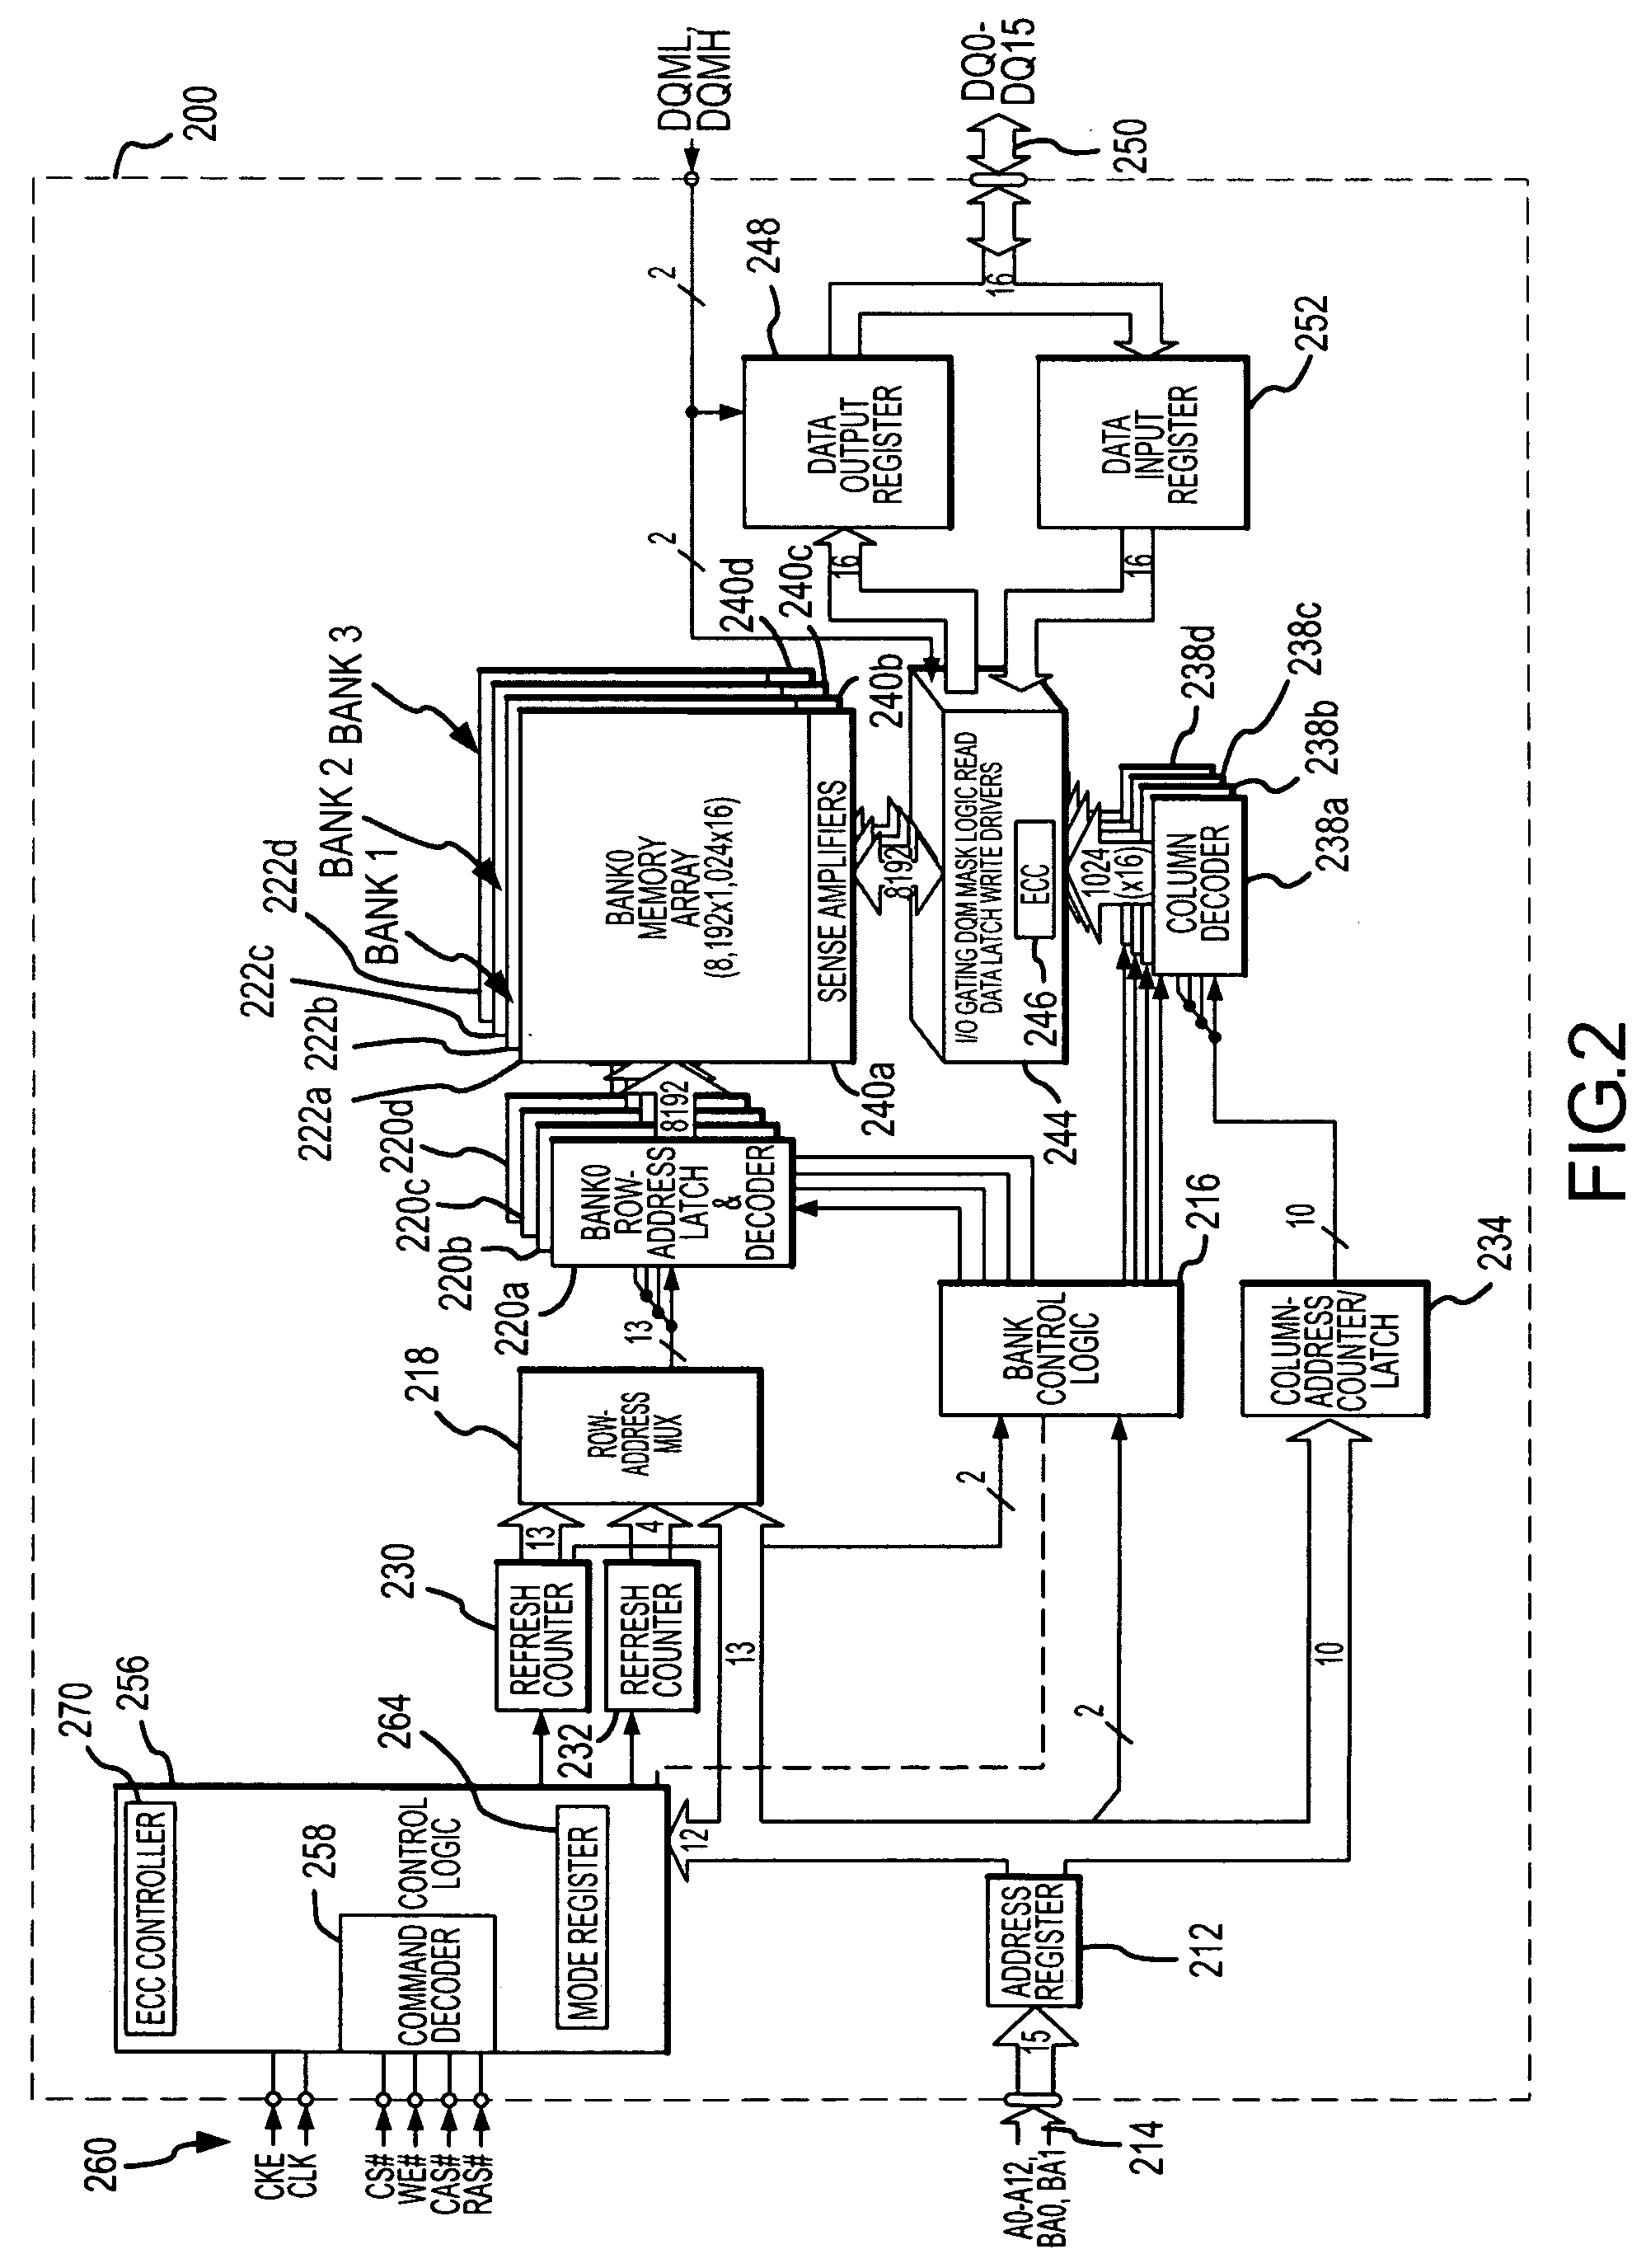 Memory system and method using partial ECC to achieve low power refresh and fast access to data